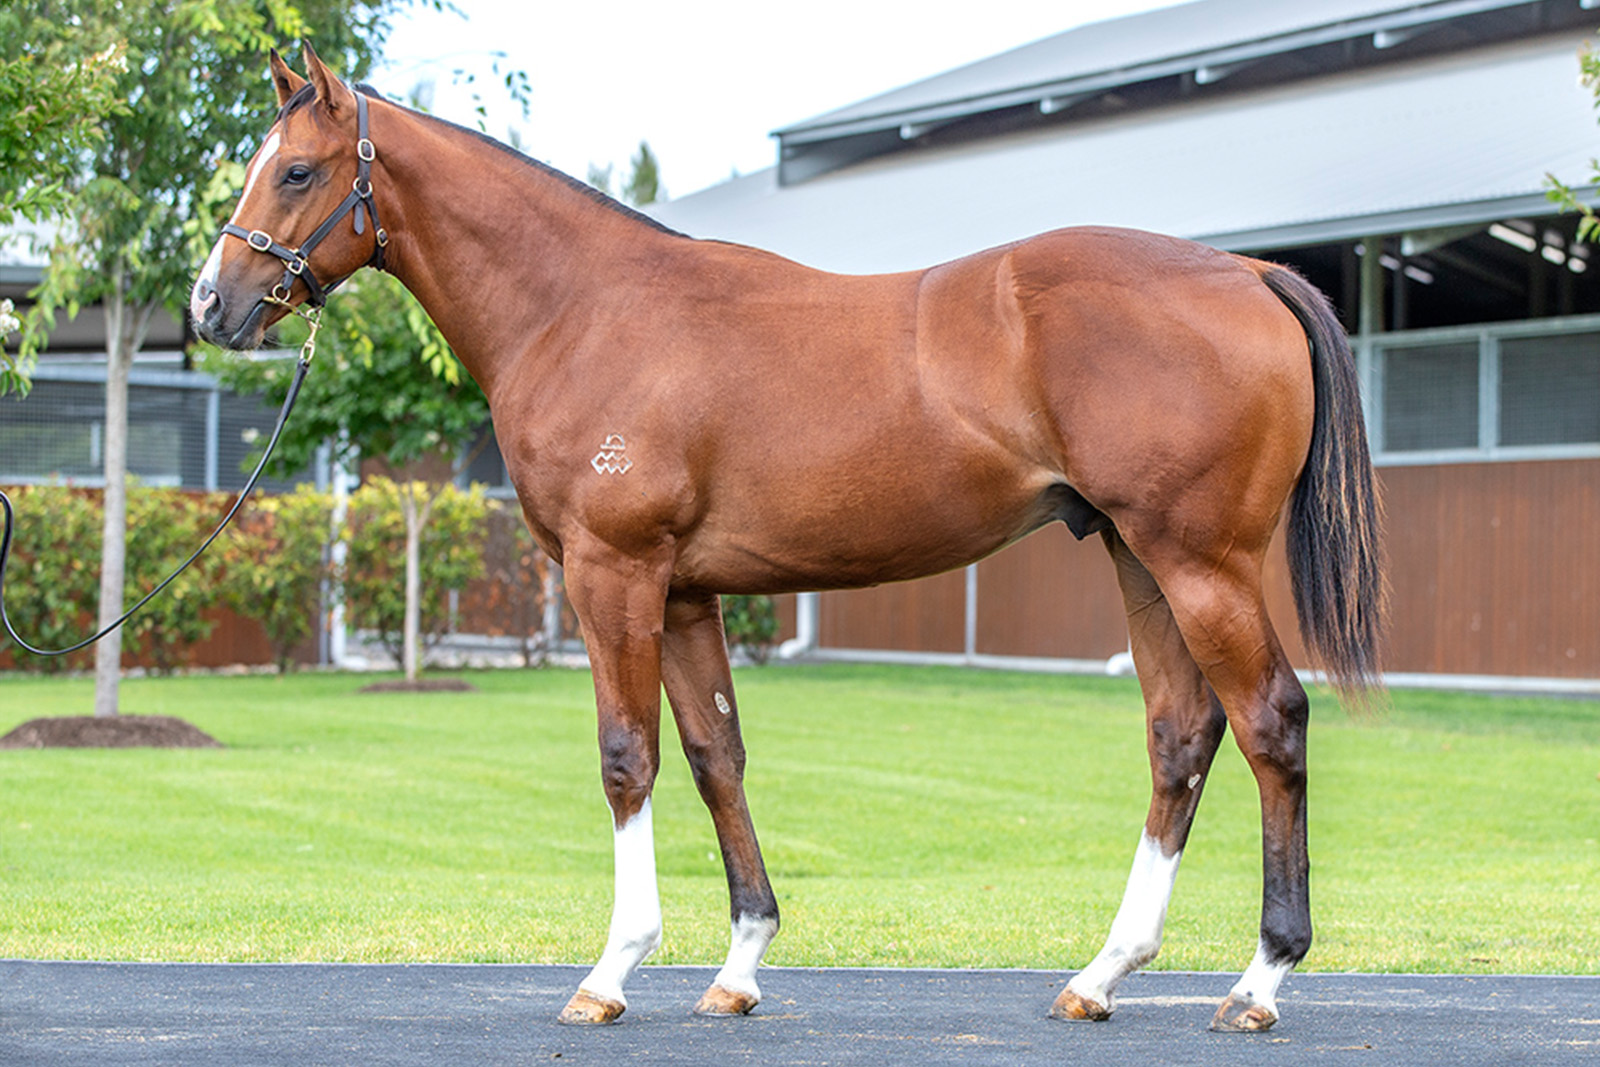 Lot 640 ex Ballet Blanc (by Redoute's Choice) colt. Sold at Magic Millions 2023 for $350,000 to Wendy & Ottavio Galletta